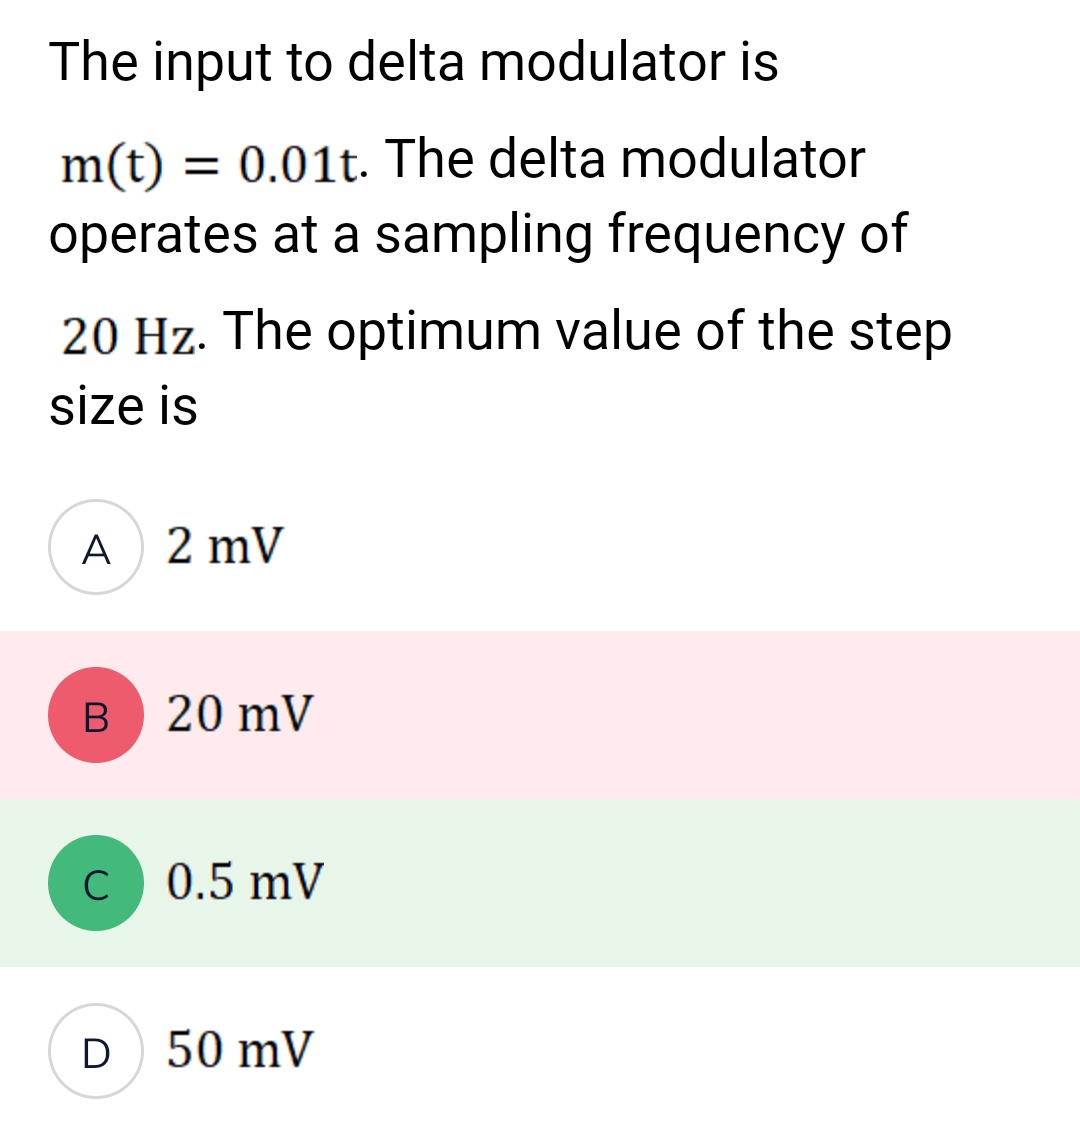 The input to delta modulator is
m(t) = 0.01t. The delta modulator
operates at a sampling frequency of
20 Hz. The optimum value of the step
size is
A 2 mV
B
C
D
20 mV
0.5 mV
50 mV